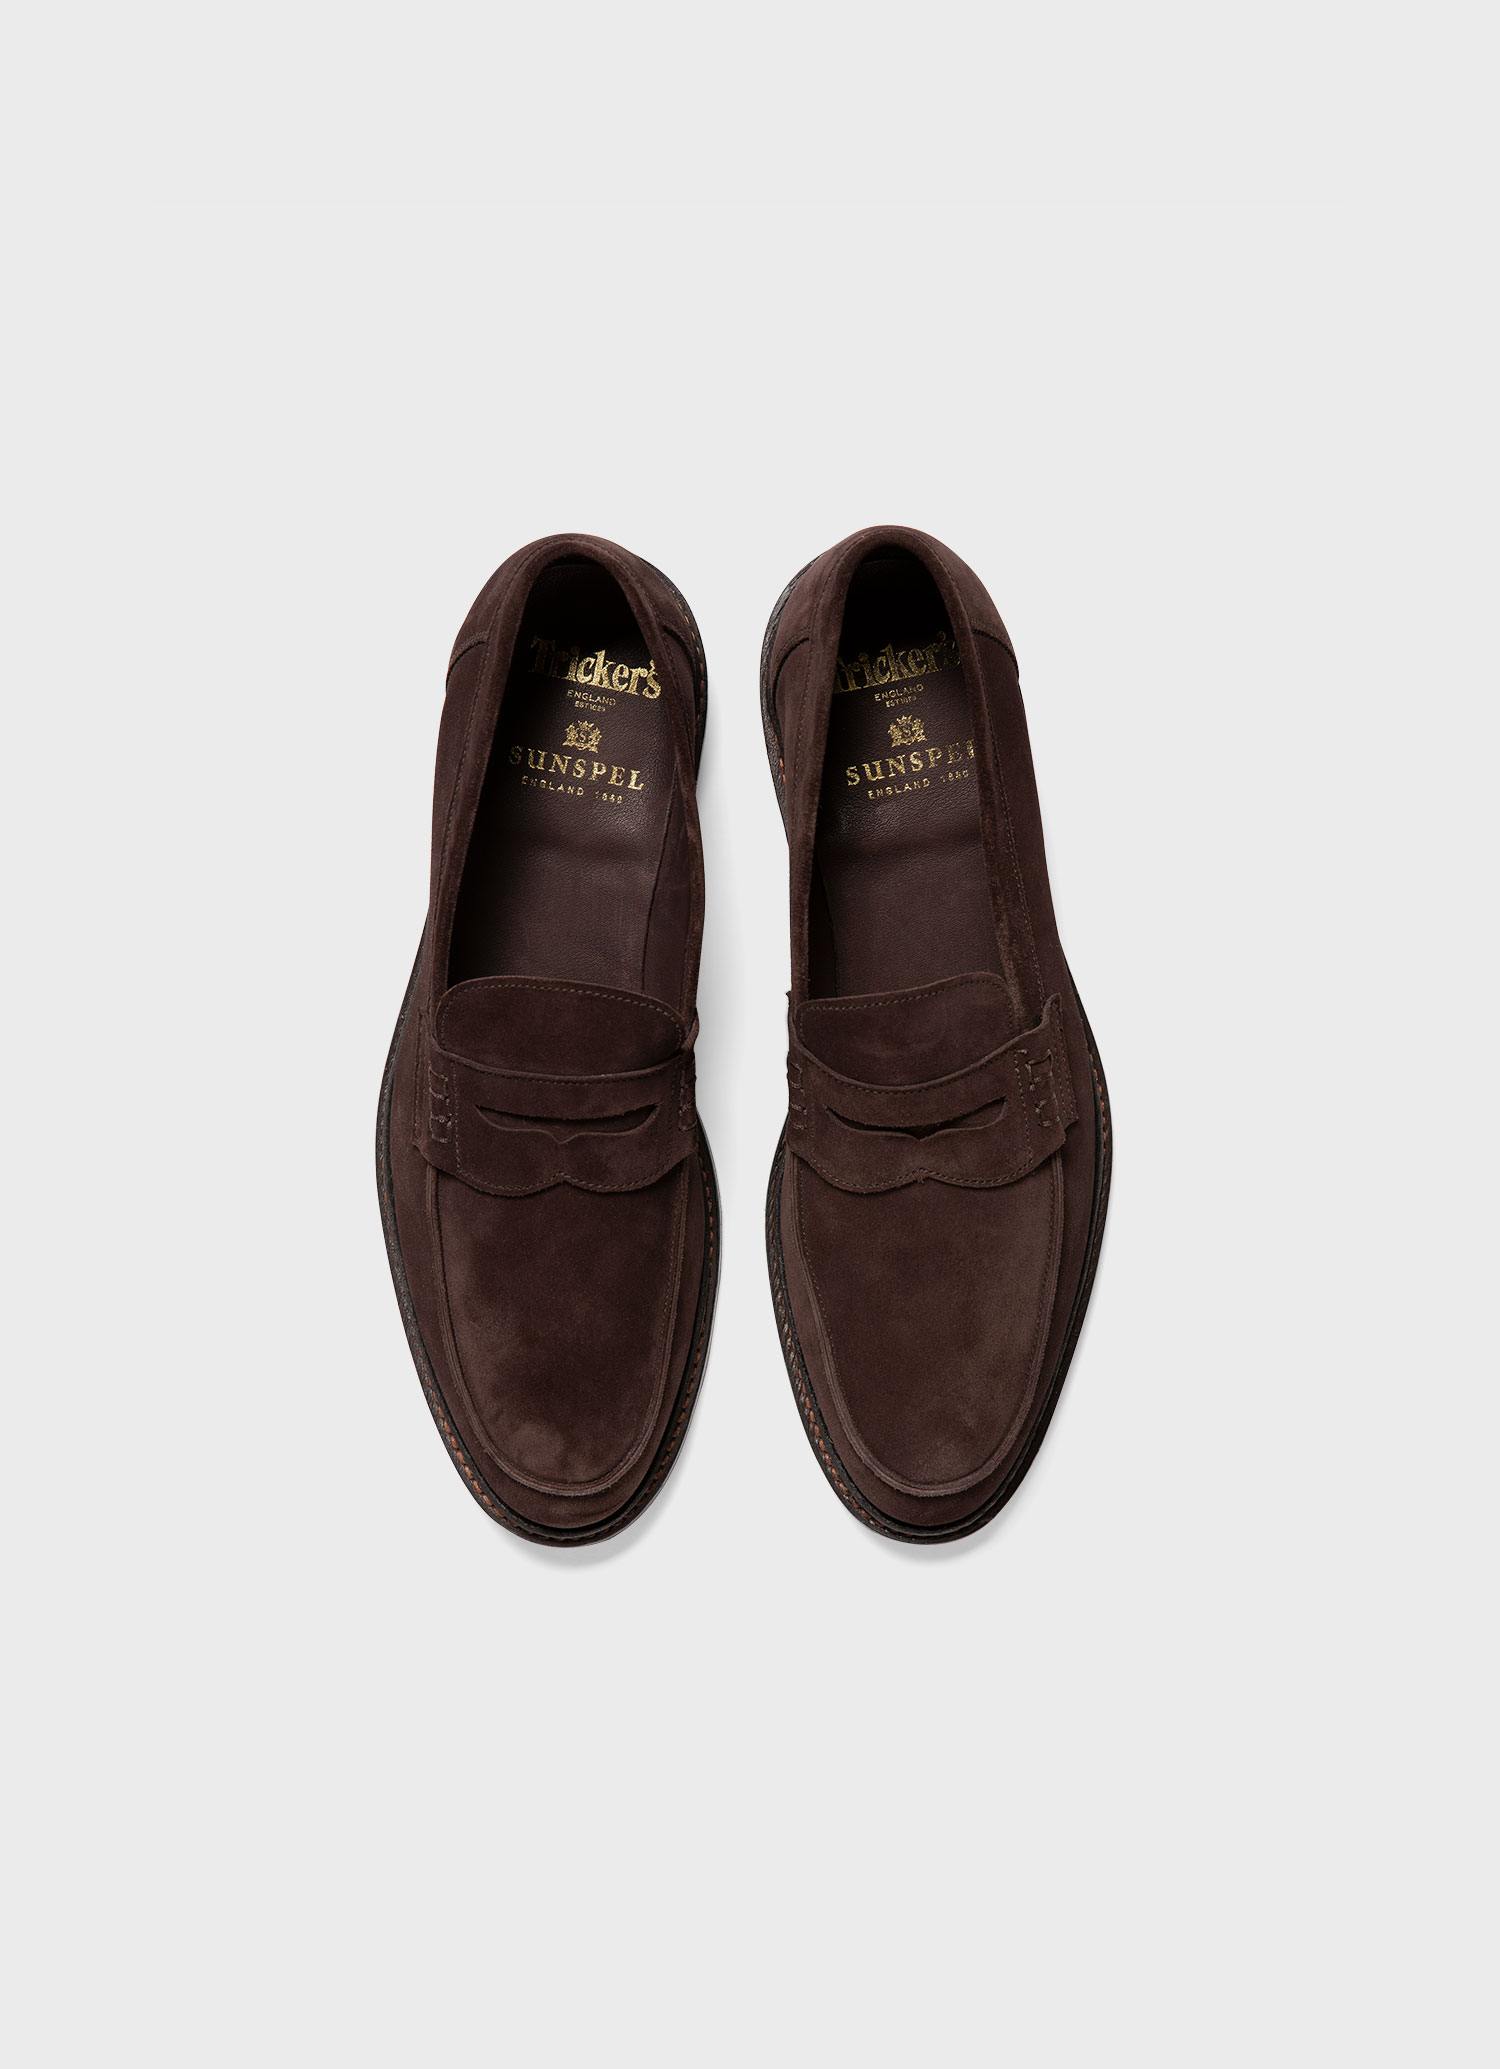 Men's Sunspel and Trickers Suede Loafer in Brown